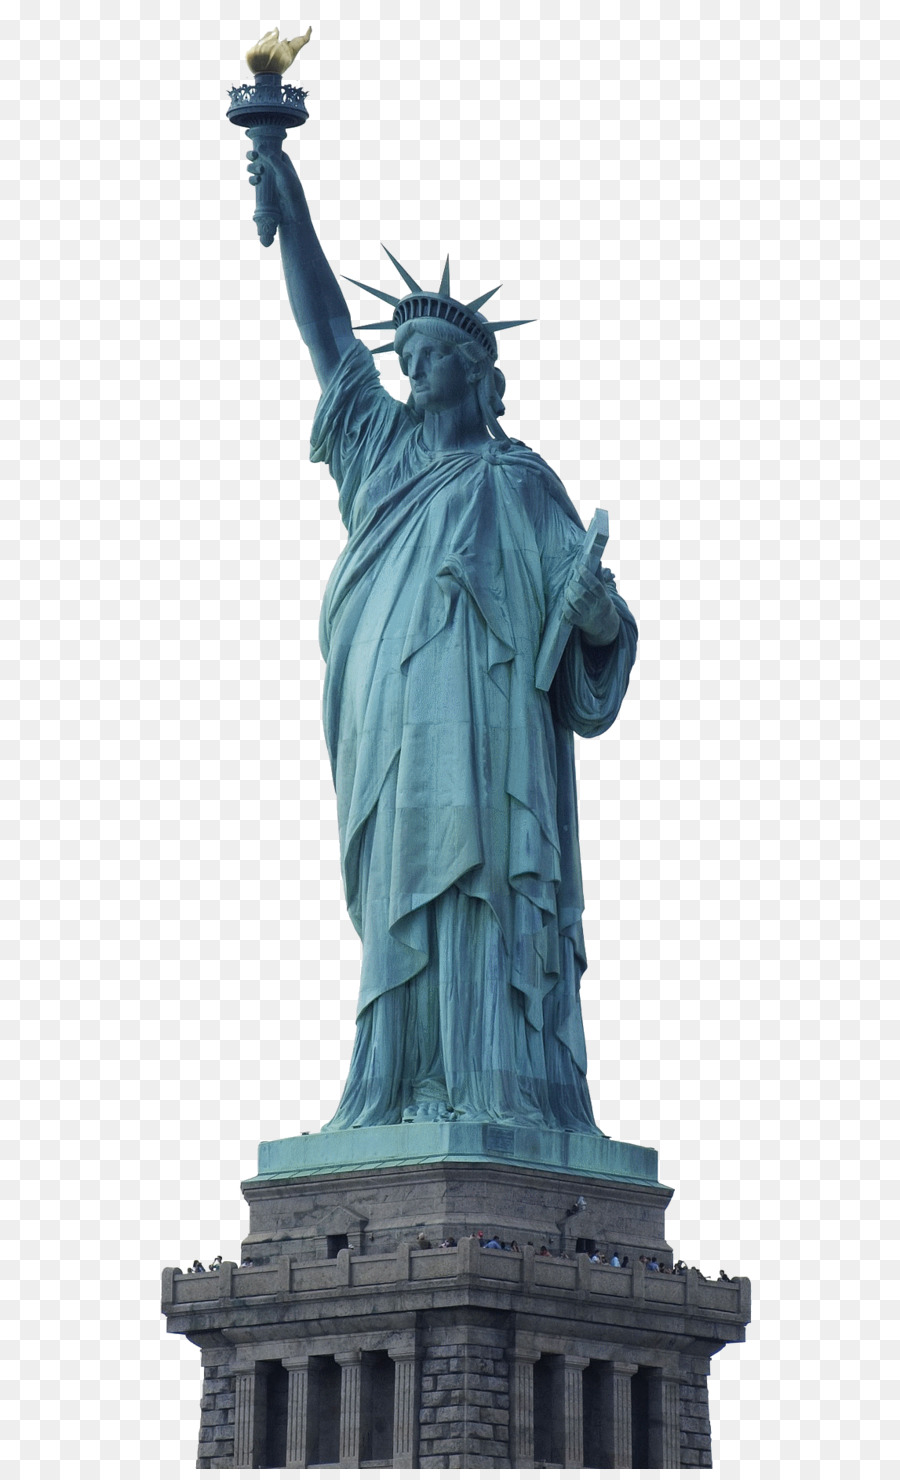 Statue of Liberty Ellis Island Image Photograph - statue of liberty png download - 1147*1872 - Free Transparent Statue Of Liberty png Download.